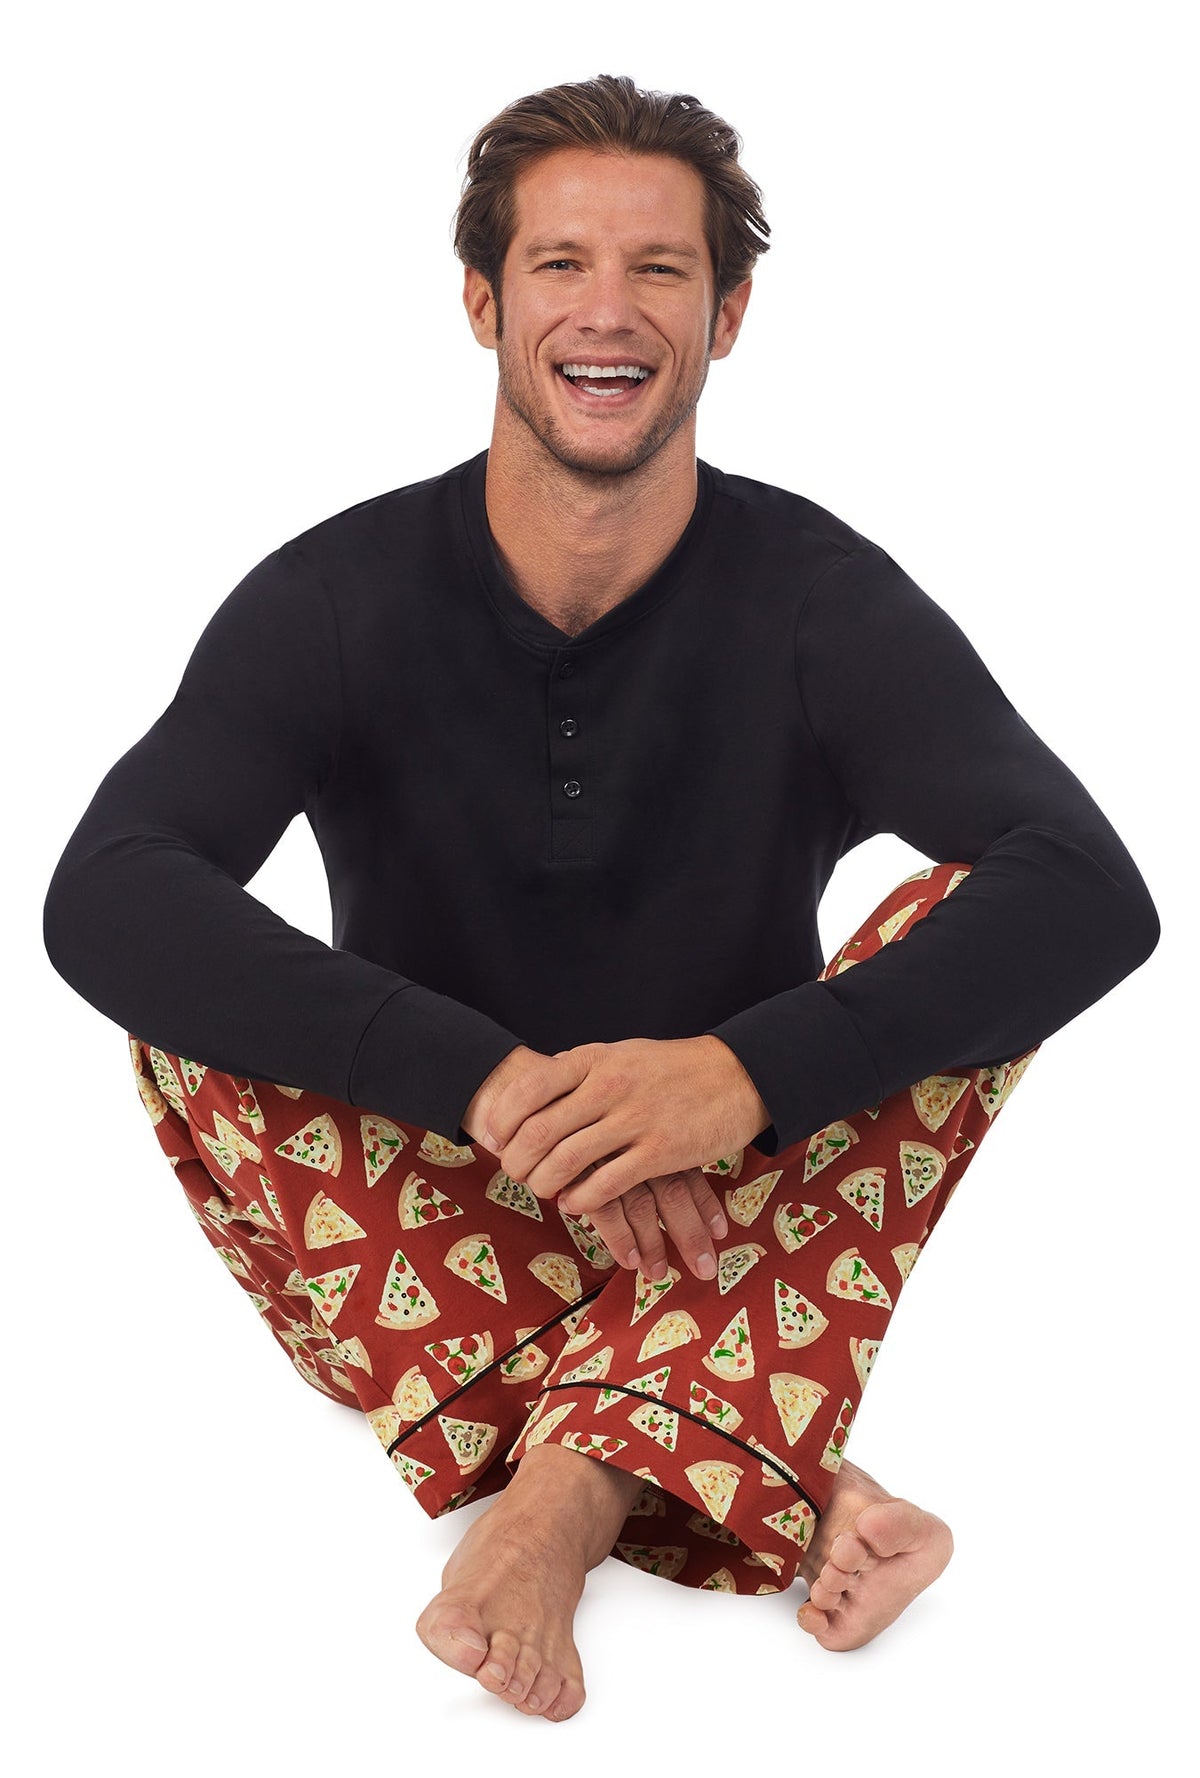 A man wearing a black long sleeve jersey and brown long bottom pj set with pizza pattern.